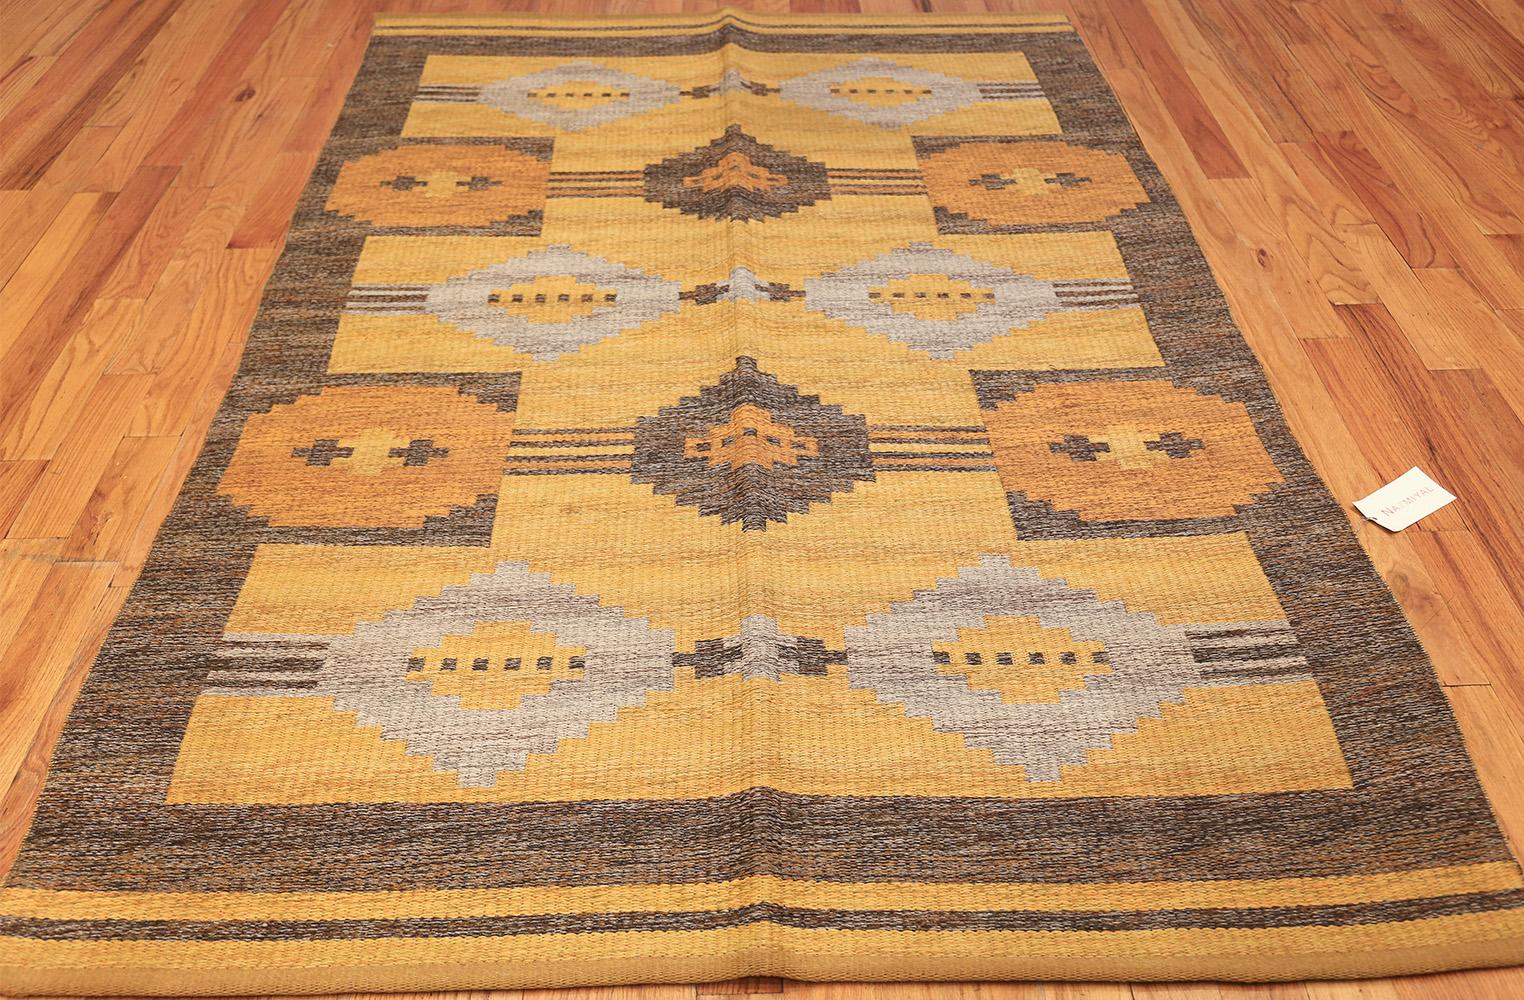 Scandinavian Modern Vintage Double-Sided Swedish Kilim Rug. Size: 5 ft x 7 ft 8 in (1.52 m x 2.34 m)